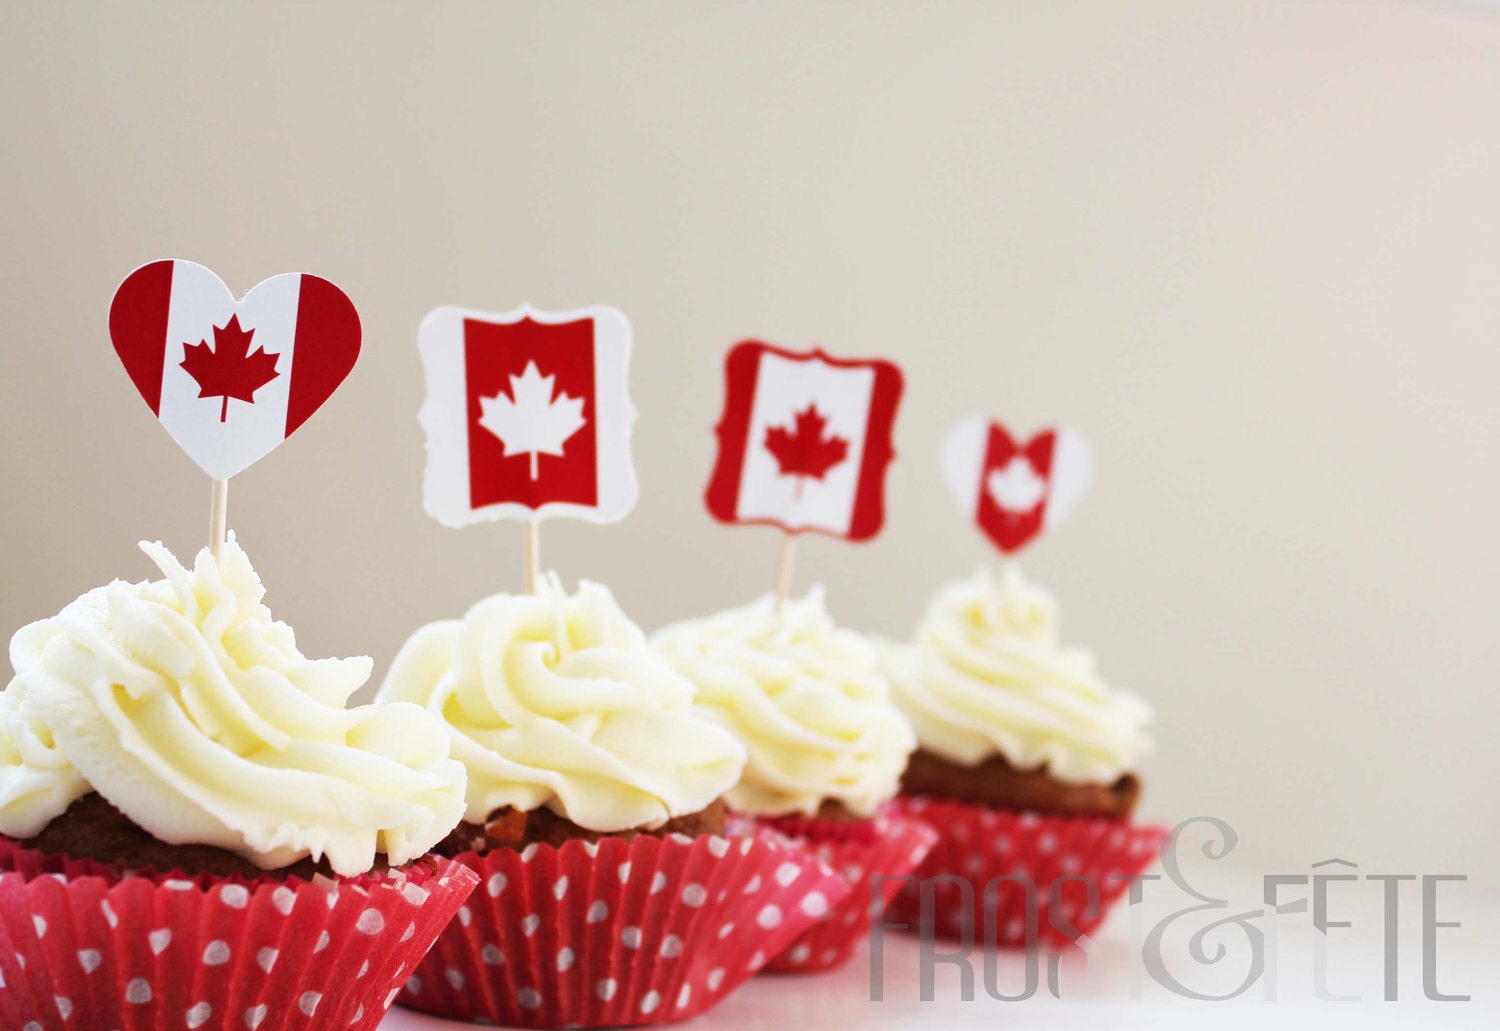 Printable file of 'Oh Canada' red and white cupcake toppers - FrostandFete